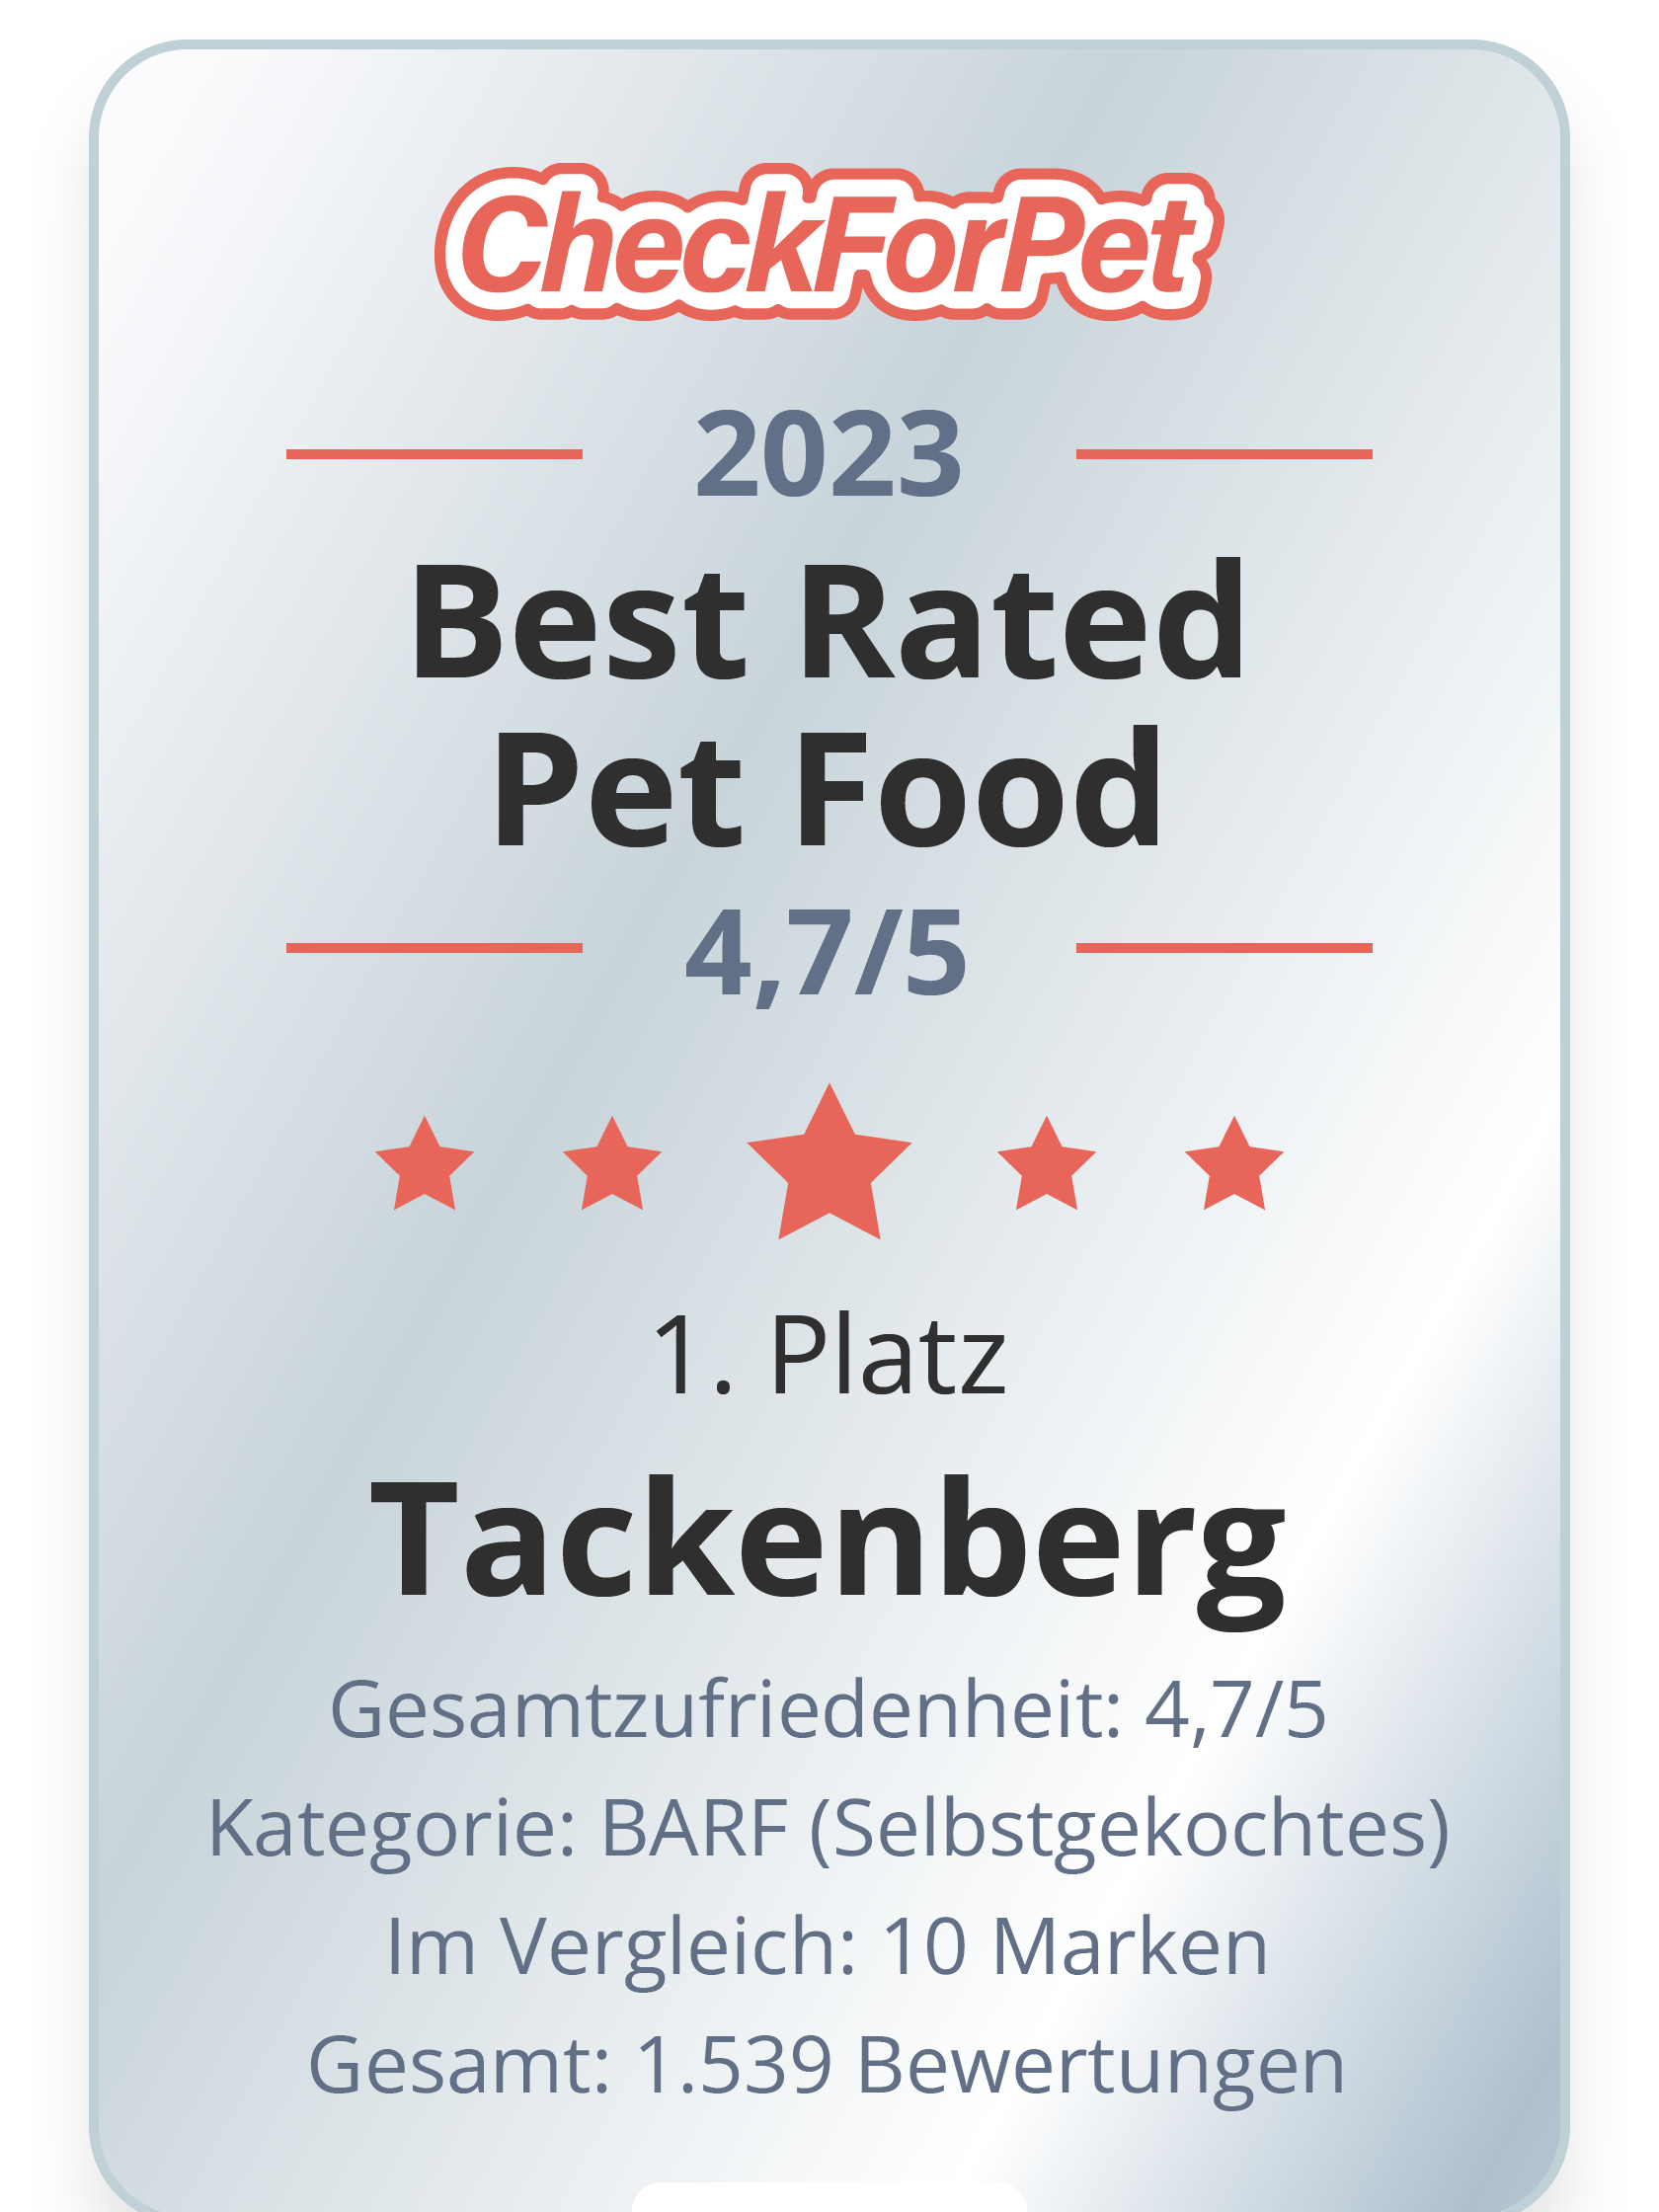 Best Rated Pet Food 2023